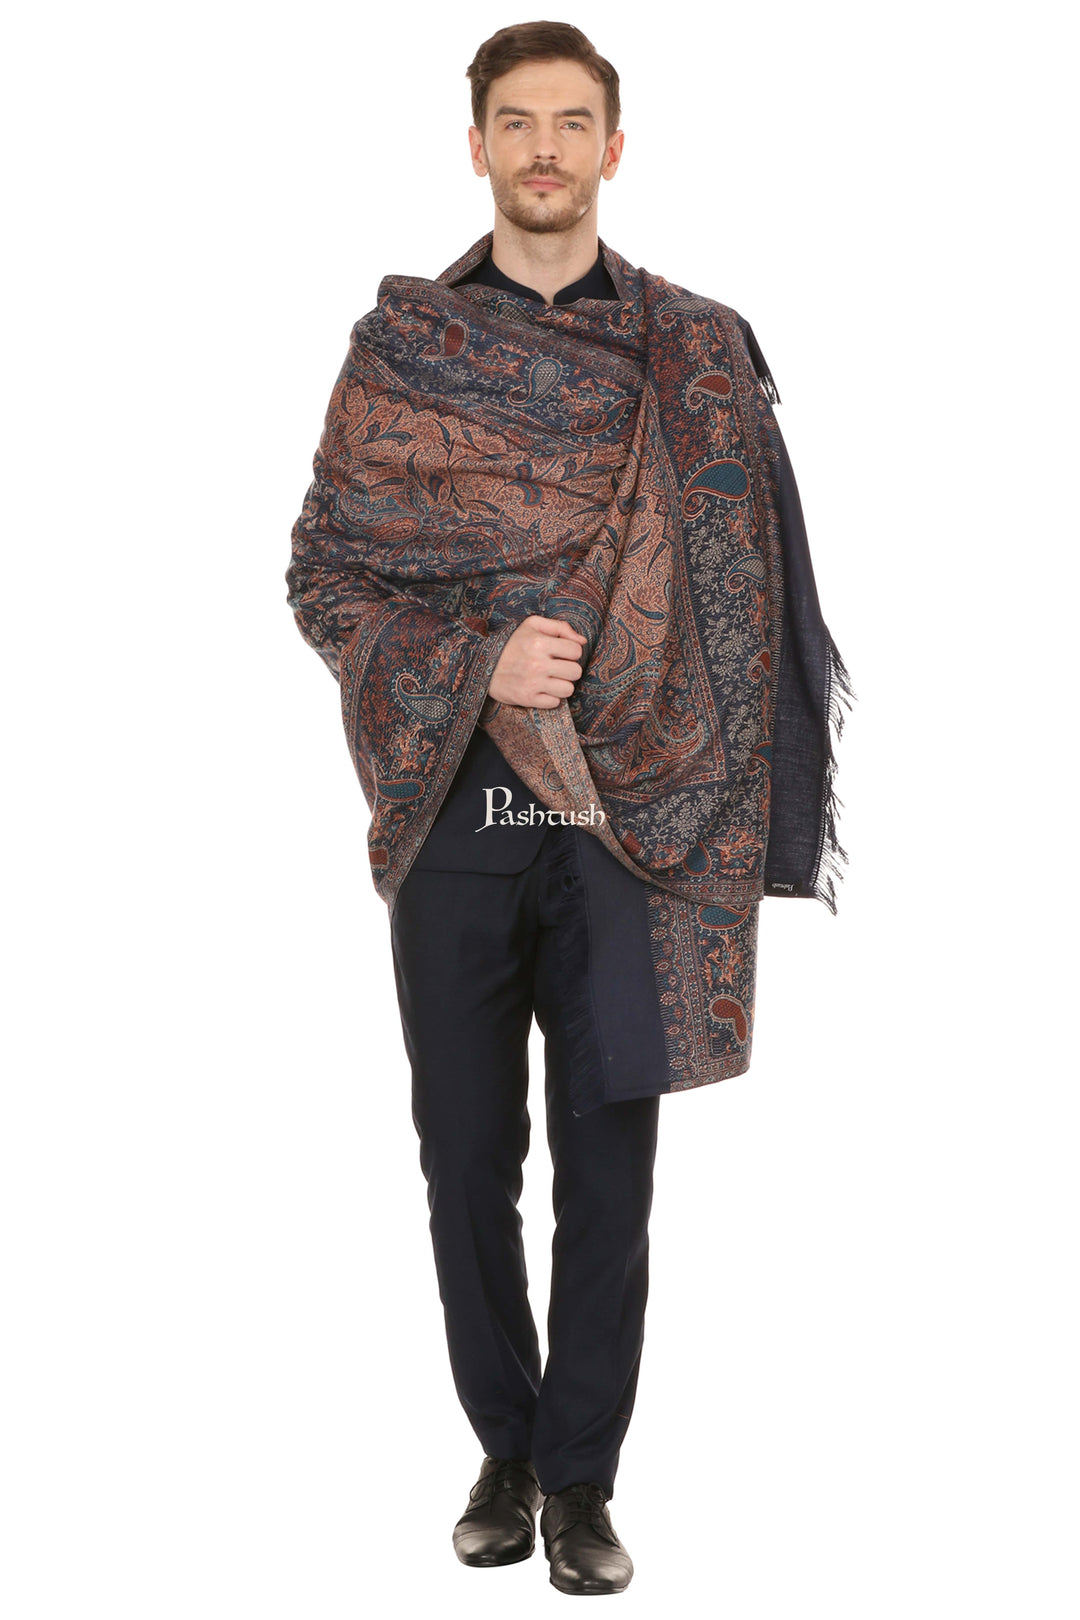 Pashtush India Gift Pack Pashtush His And Her Set Of Jamawar Stole and Shawl With Premium Gift Box Packaging, Navy Blue and Maroon